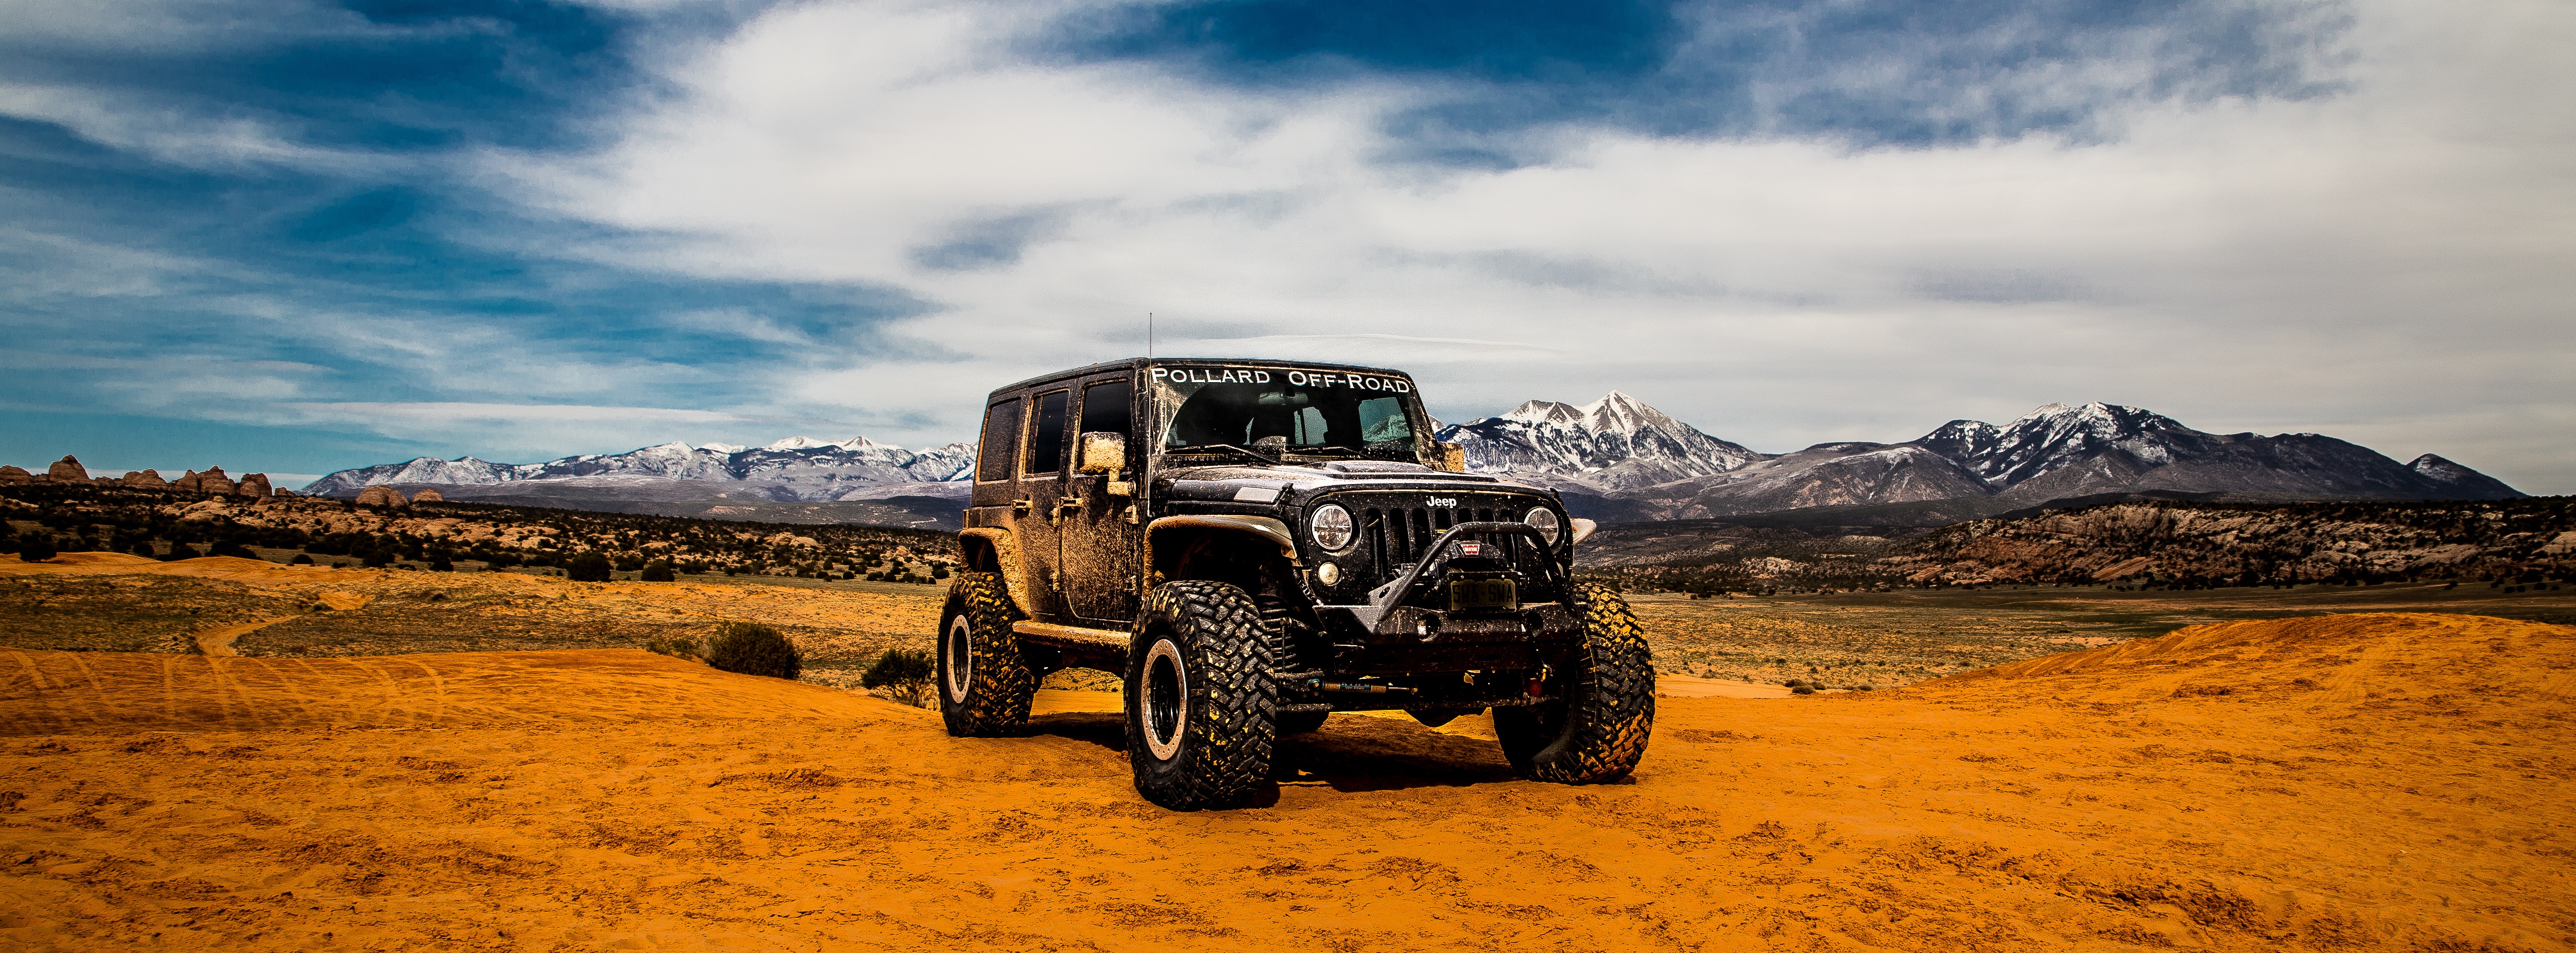 Off Road Vehicles 4x4 Jeeps Hd Wallpapers Hd Wallpapers